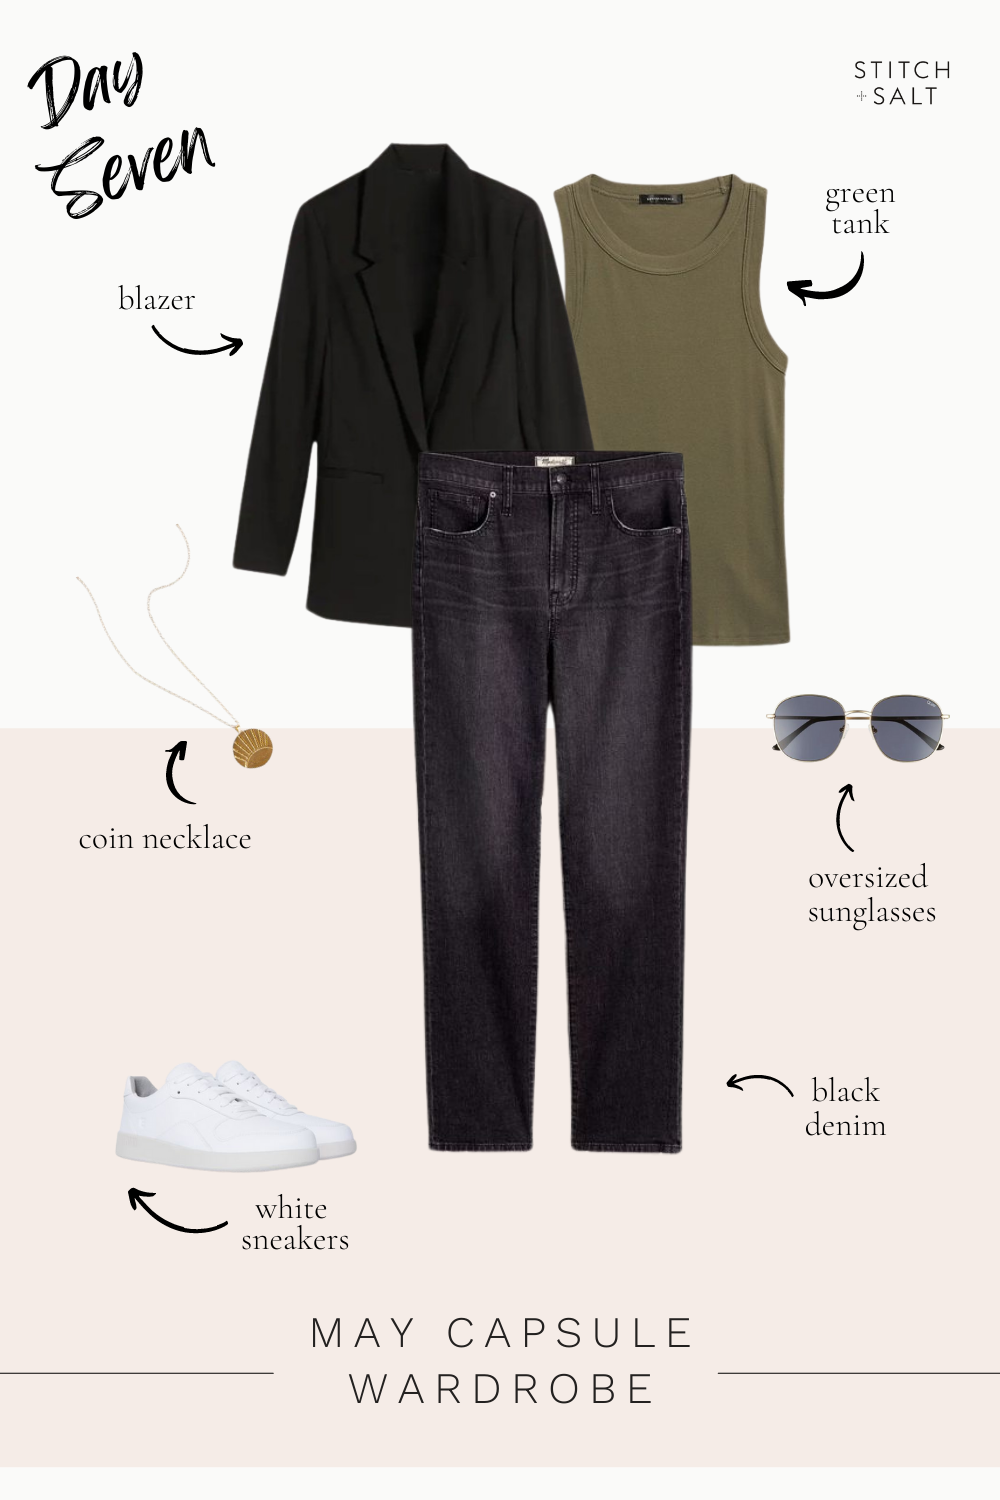 May Capsule Wardrobe Plus 30 Outfit Ideas! - Stitch & Salt